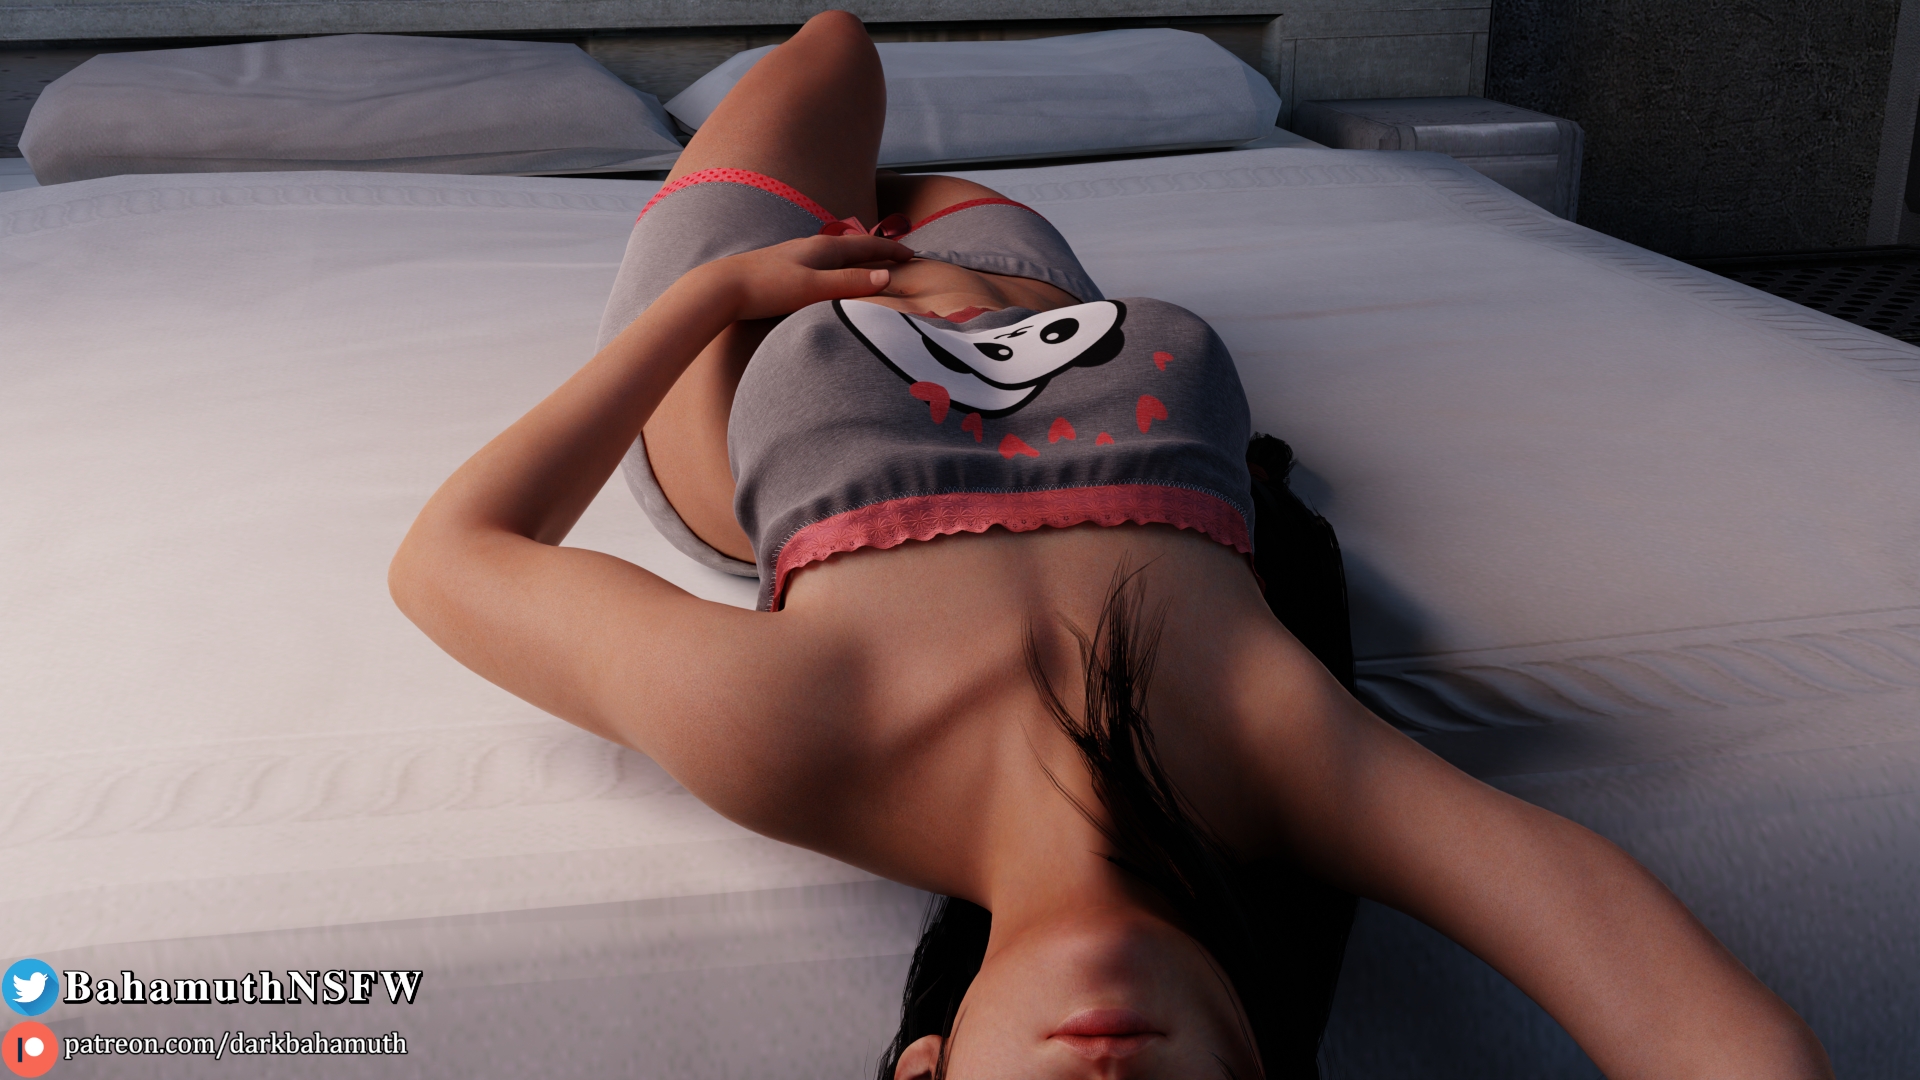 Tifa is waiting for you in bed! Tifa Lockhart Final Fantasy Final Fantasy 7 Final Fantasy 7 Remake Final Fantasy VII 